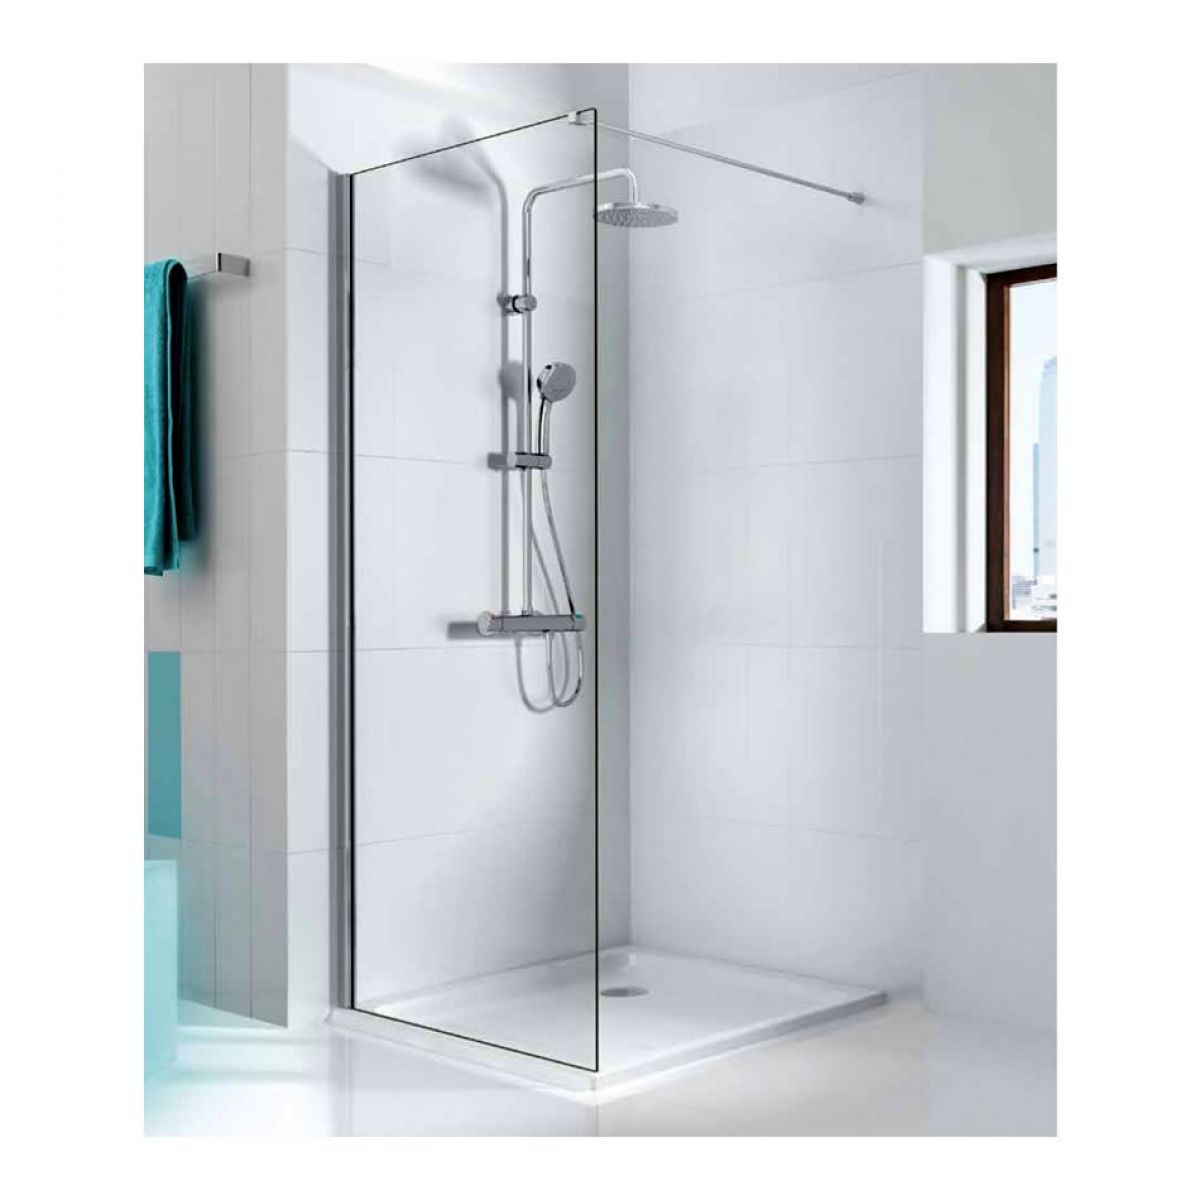 Roca Victoria T Thermostatic Shower Column  with 2 Heads 